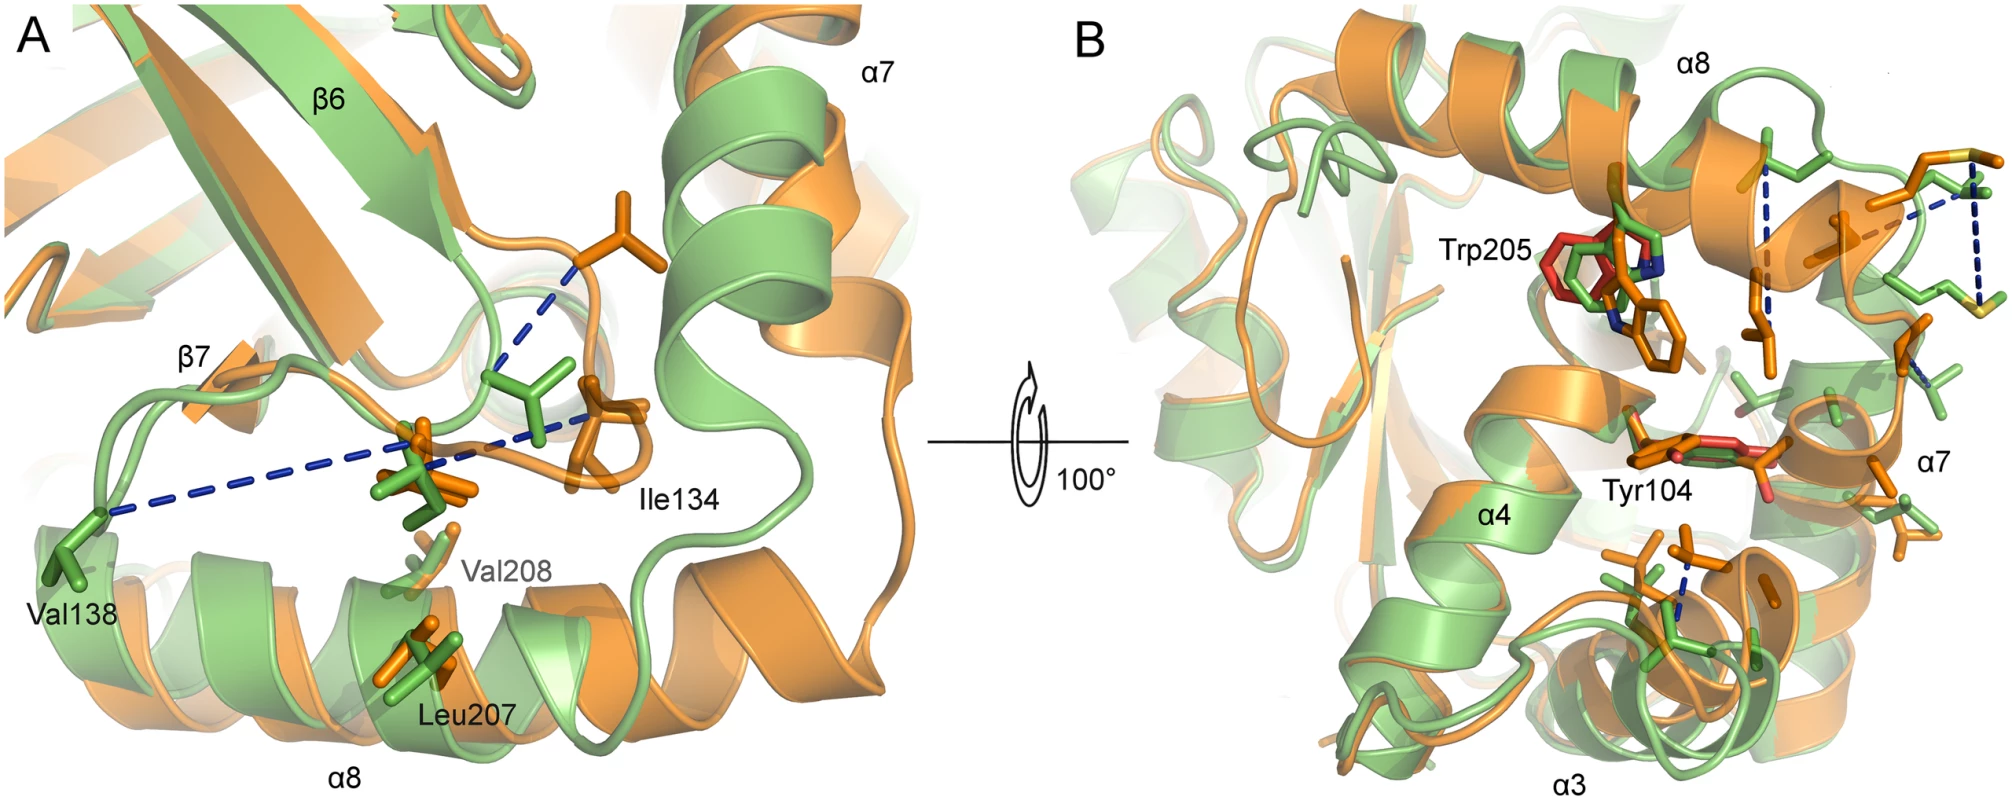 Active site and dimer interface helices of superposed monomers of monomeric and dimeric PrV assemblin.